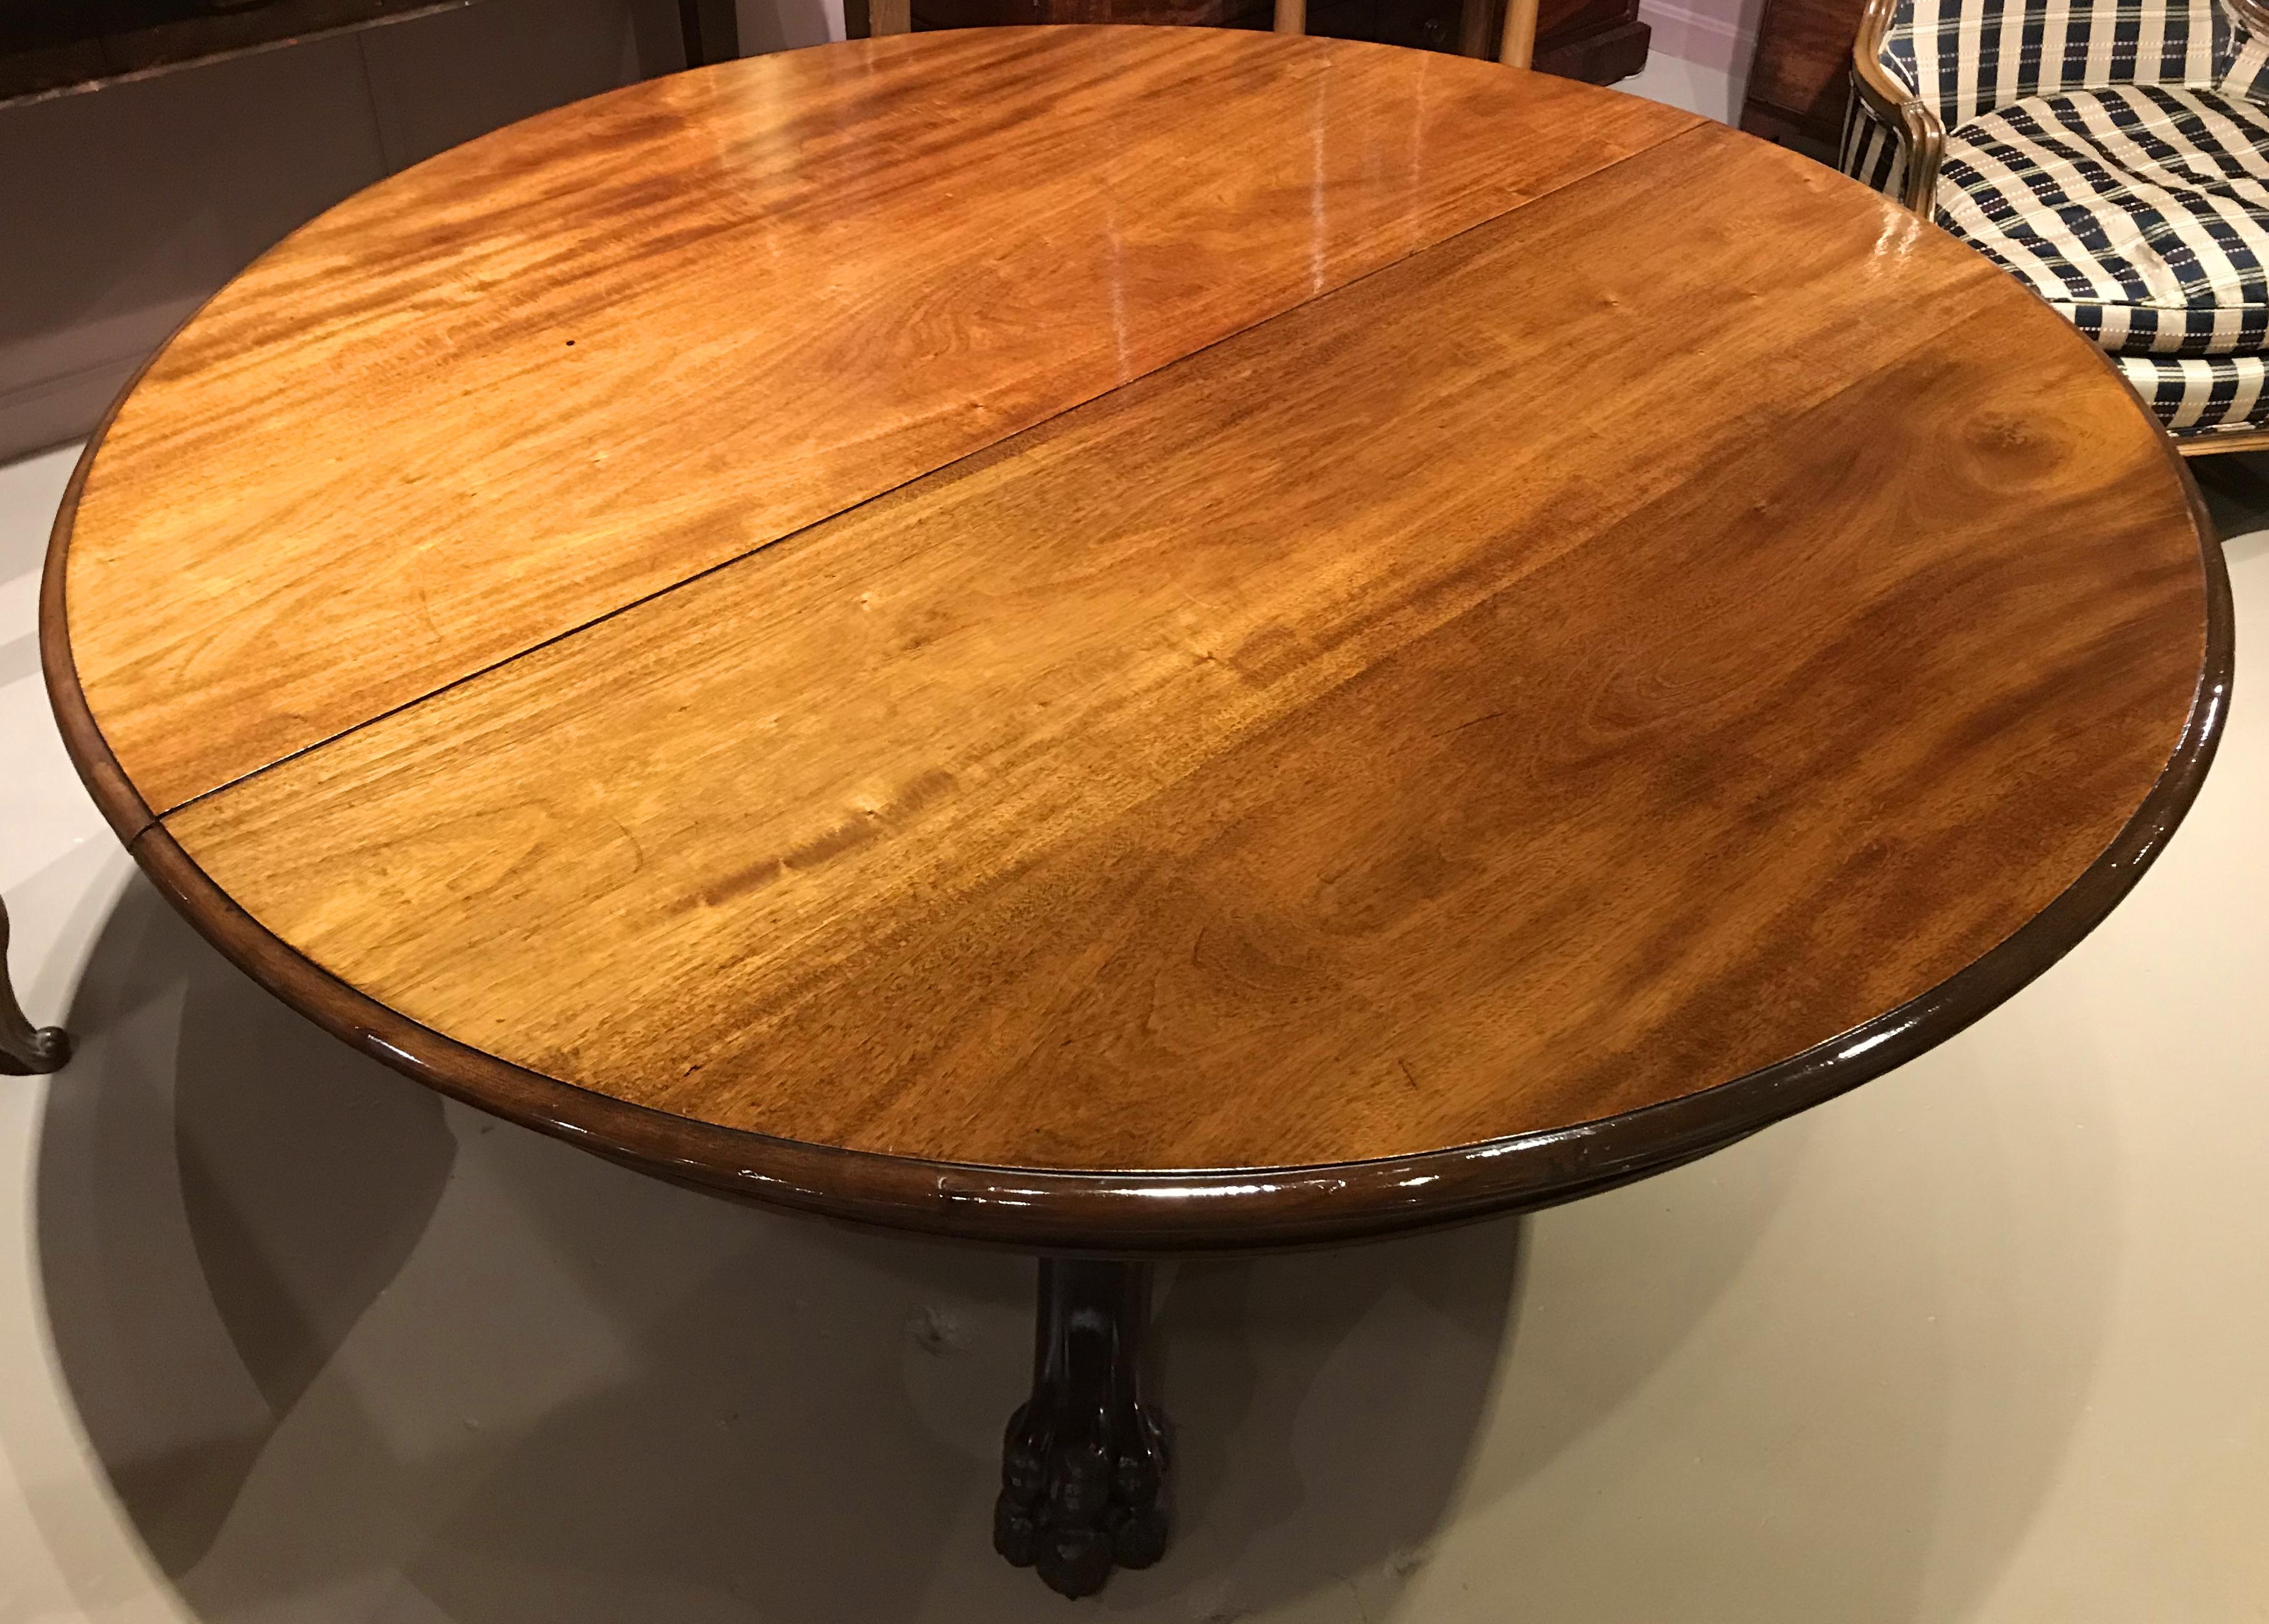 A fine mahogany split pedestal round dining table with gadrooned edge, paw feet, and three leaves. Pedestal opens to reveal center support leg and leaf support mechanism.Overall very good condition with some finish inconsistencies, fade and